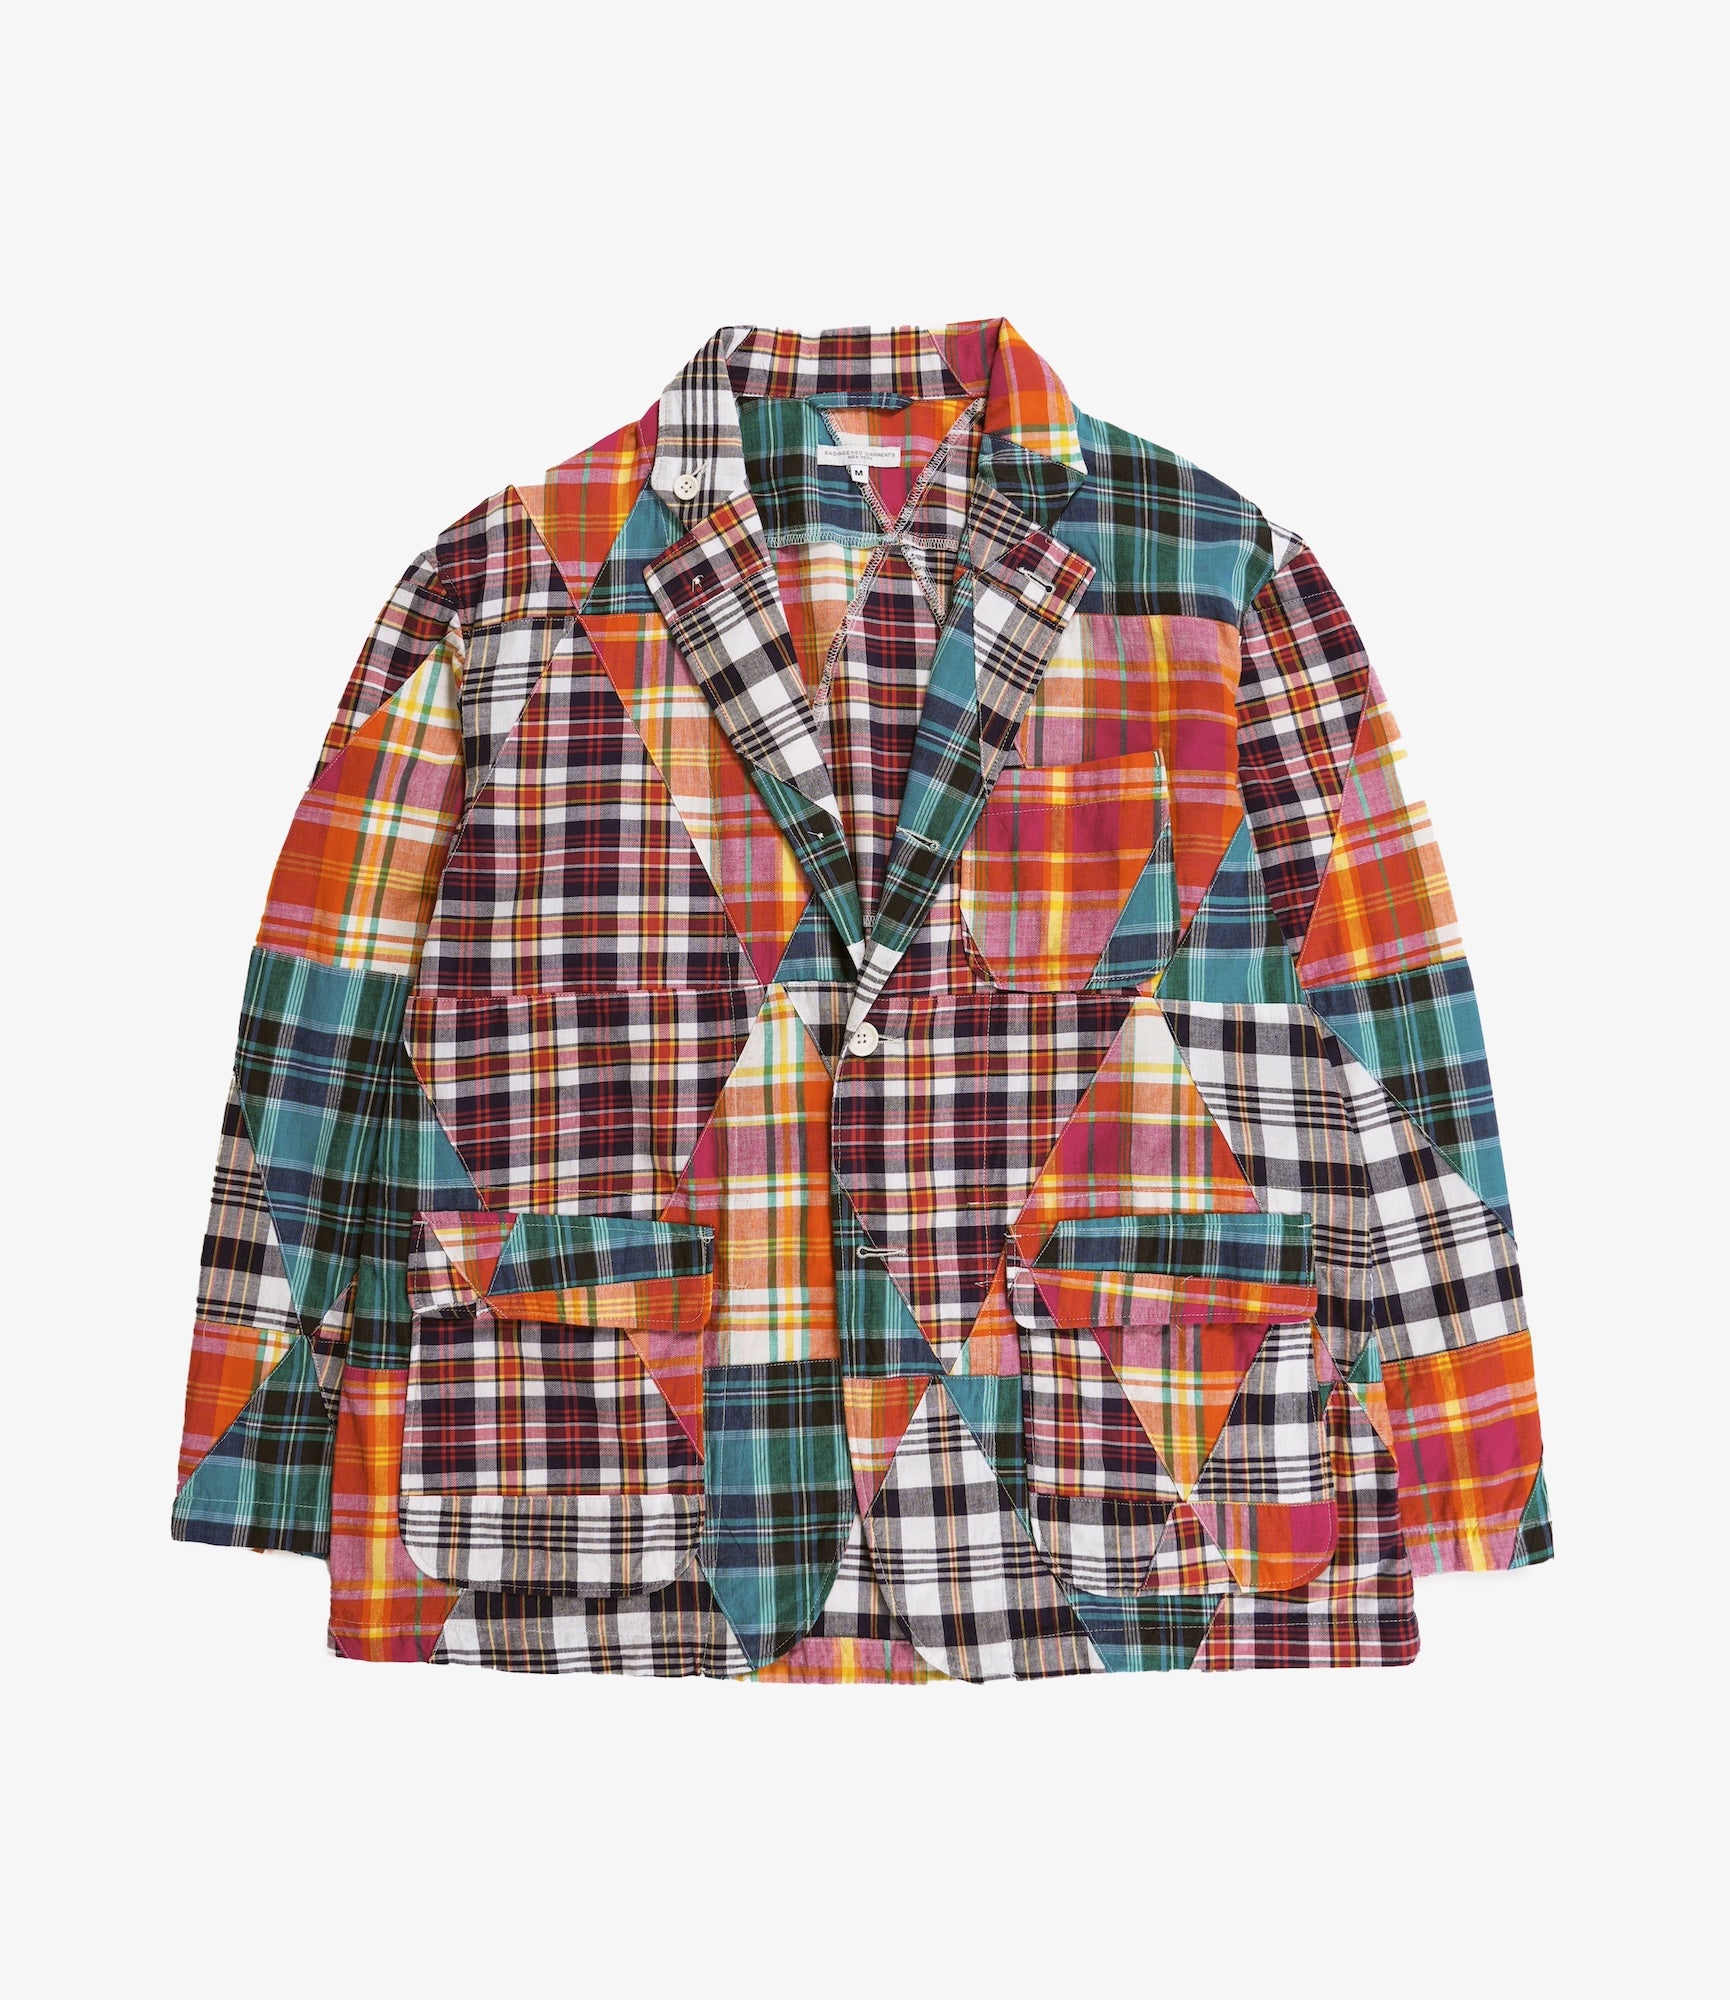 Engineered Garments Loiter Jacket - Multi Color Triangle Patchwork Madras